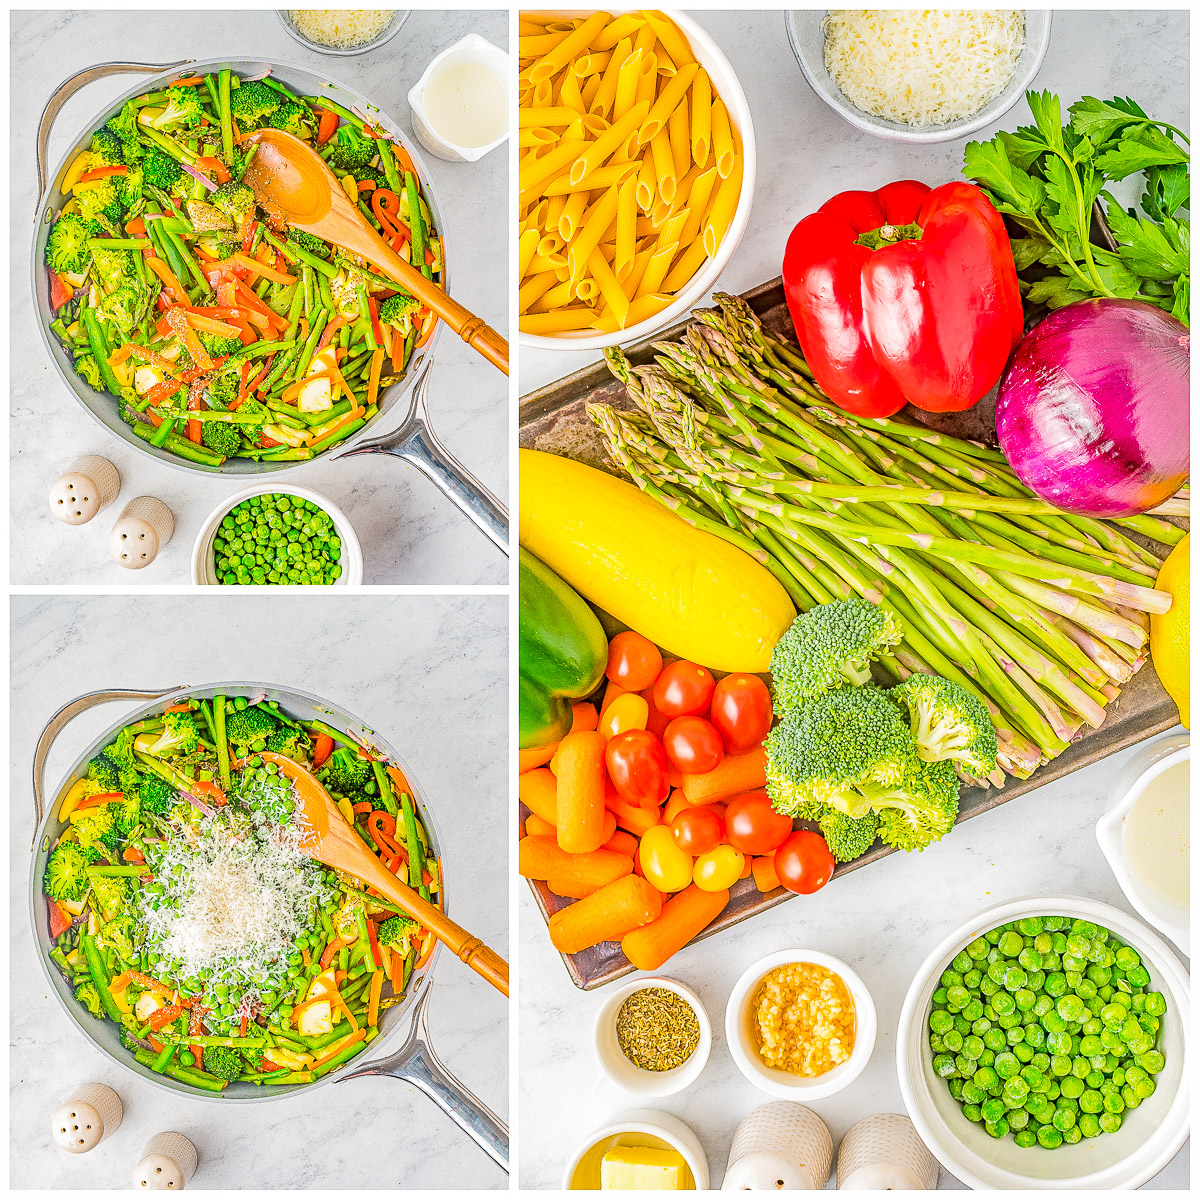 Pasta Primavera - An EASY pasta recipe that's chock full of brightly colored and lightly sautéed vegetables, penne pasta, and tossed in a light lemon cream sauce with Parmesan cheese! Great for busy weeknights when you need to get a family-approved dinner on the table quickly and you can sneak in lots of veggies!